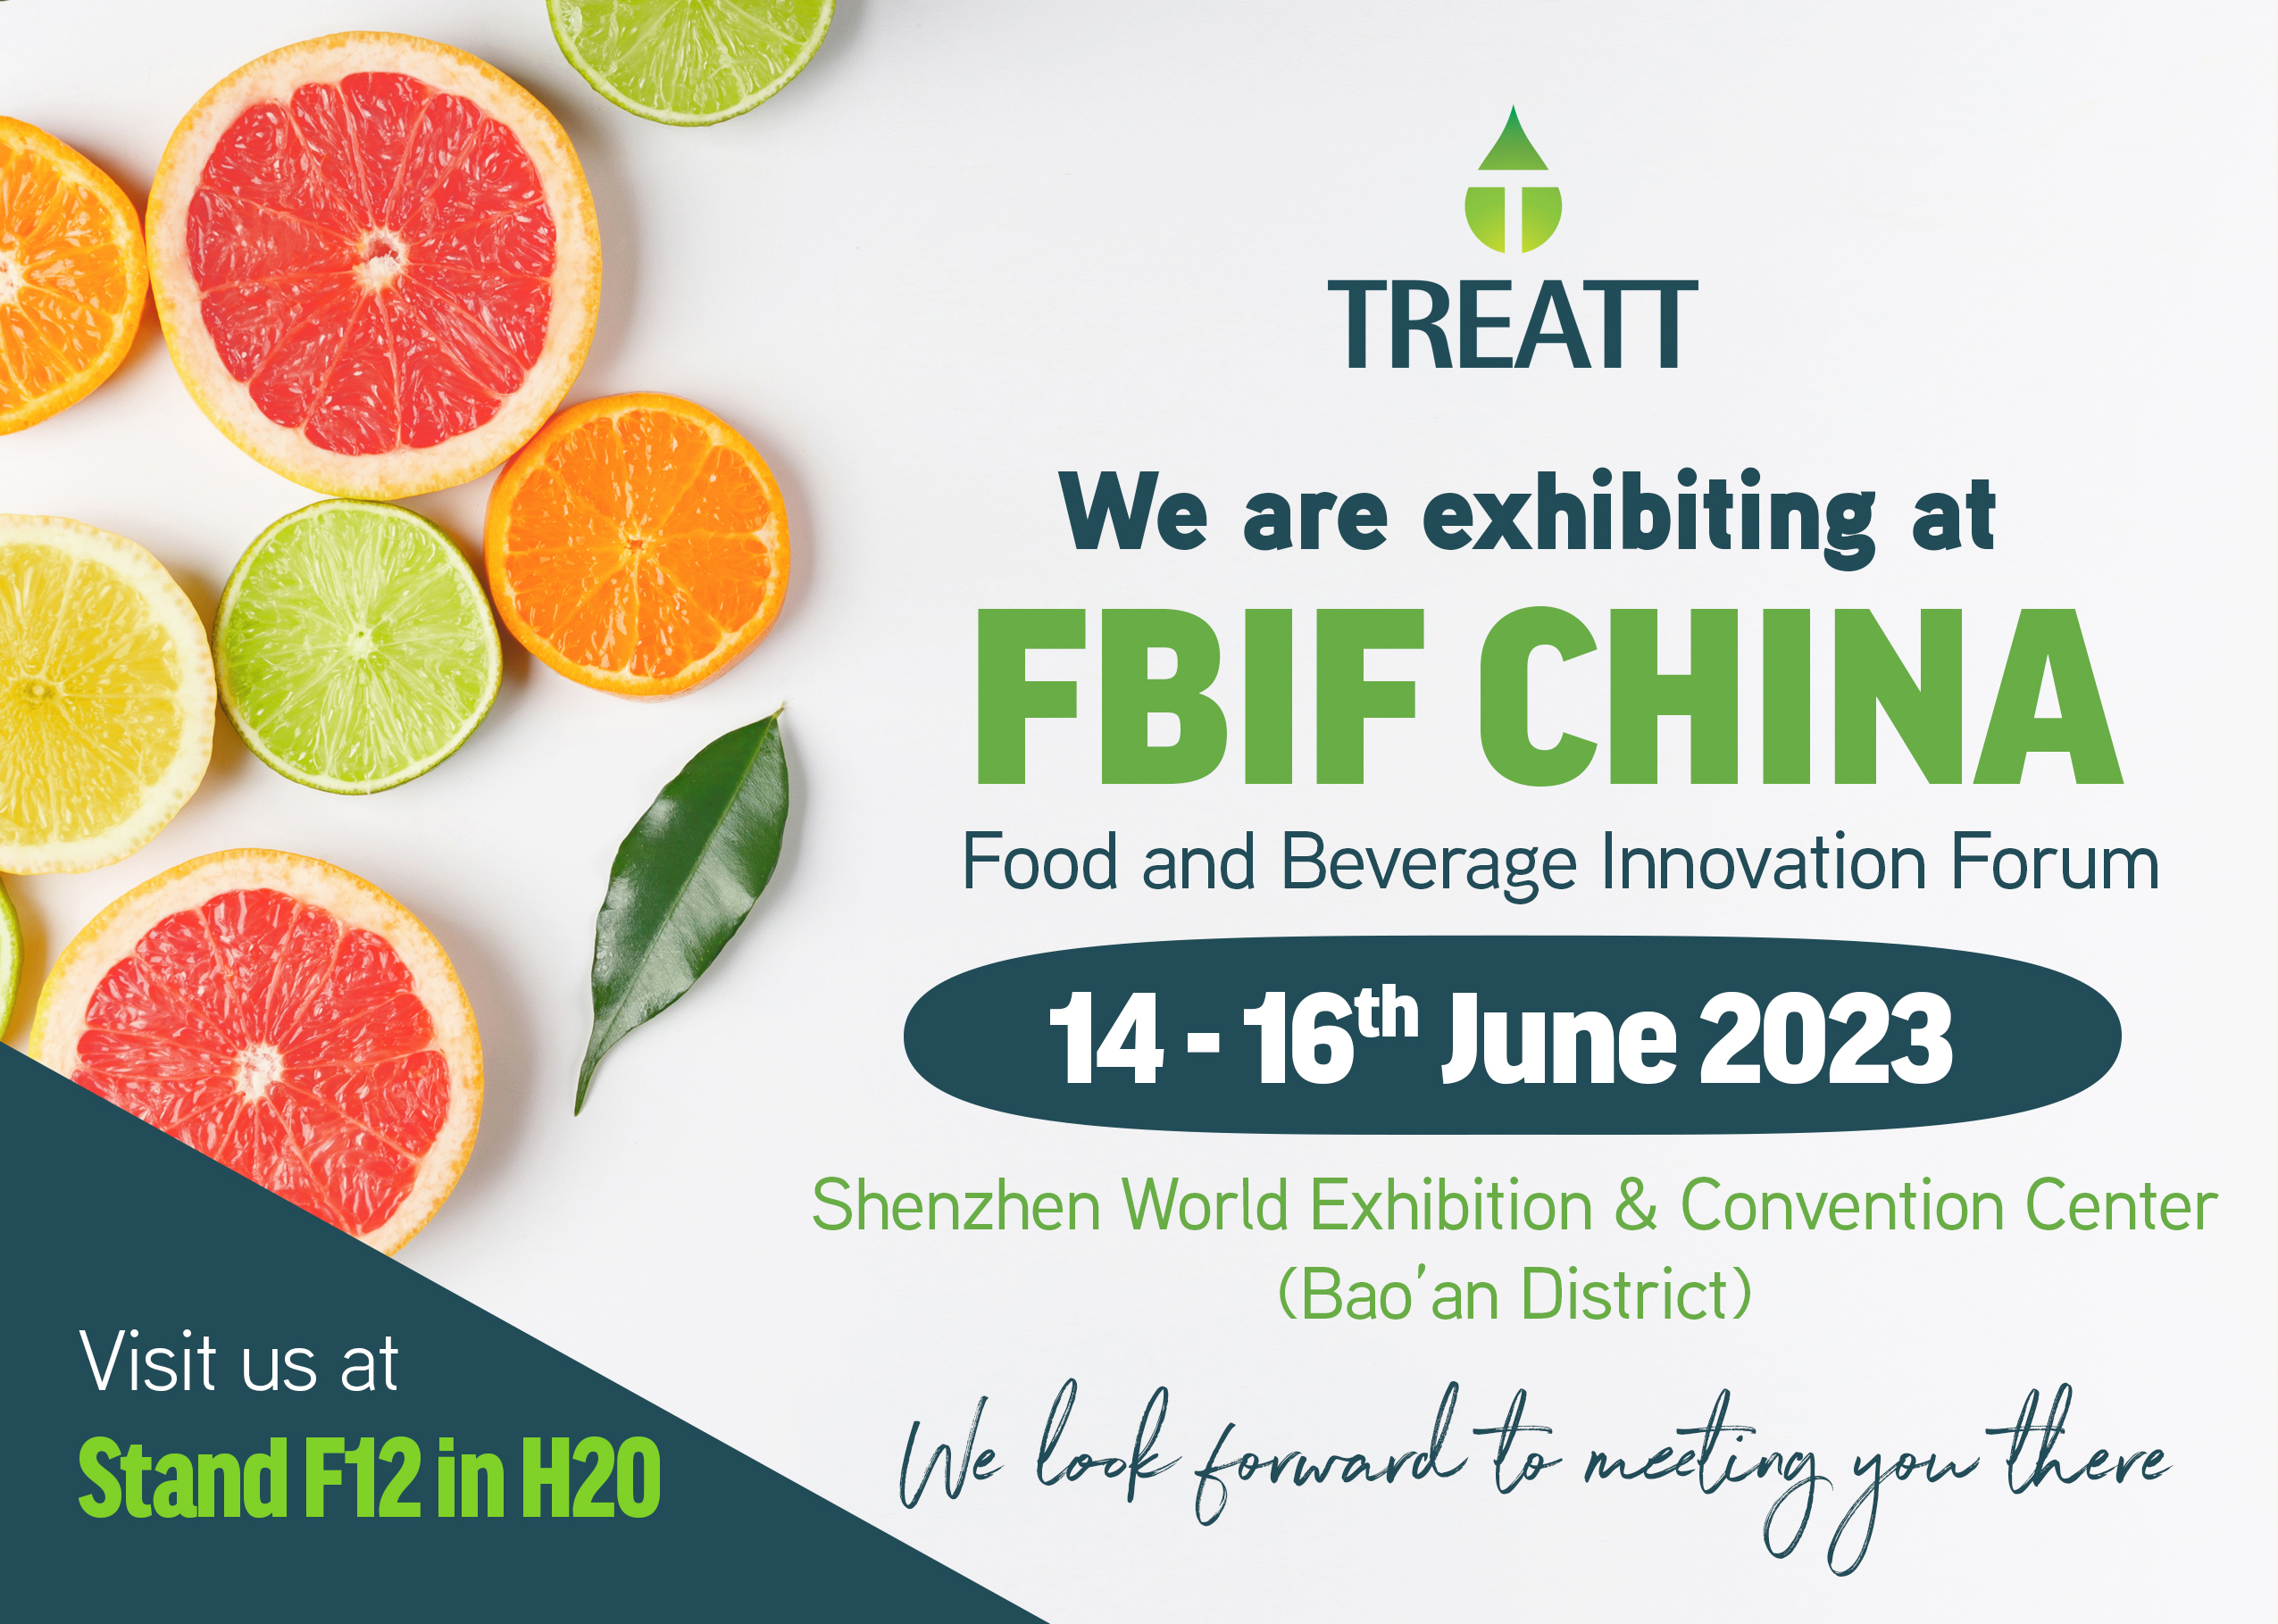 Food and Beverage Innovation Forum (FBIF) and iFood Show invitation to attendees of the event.